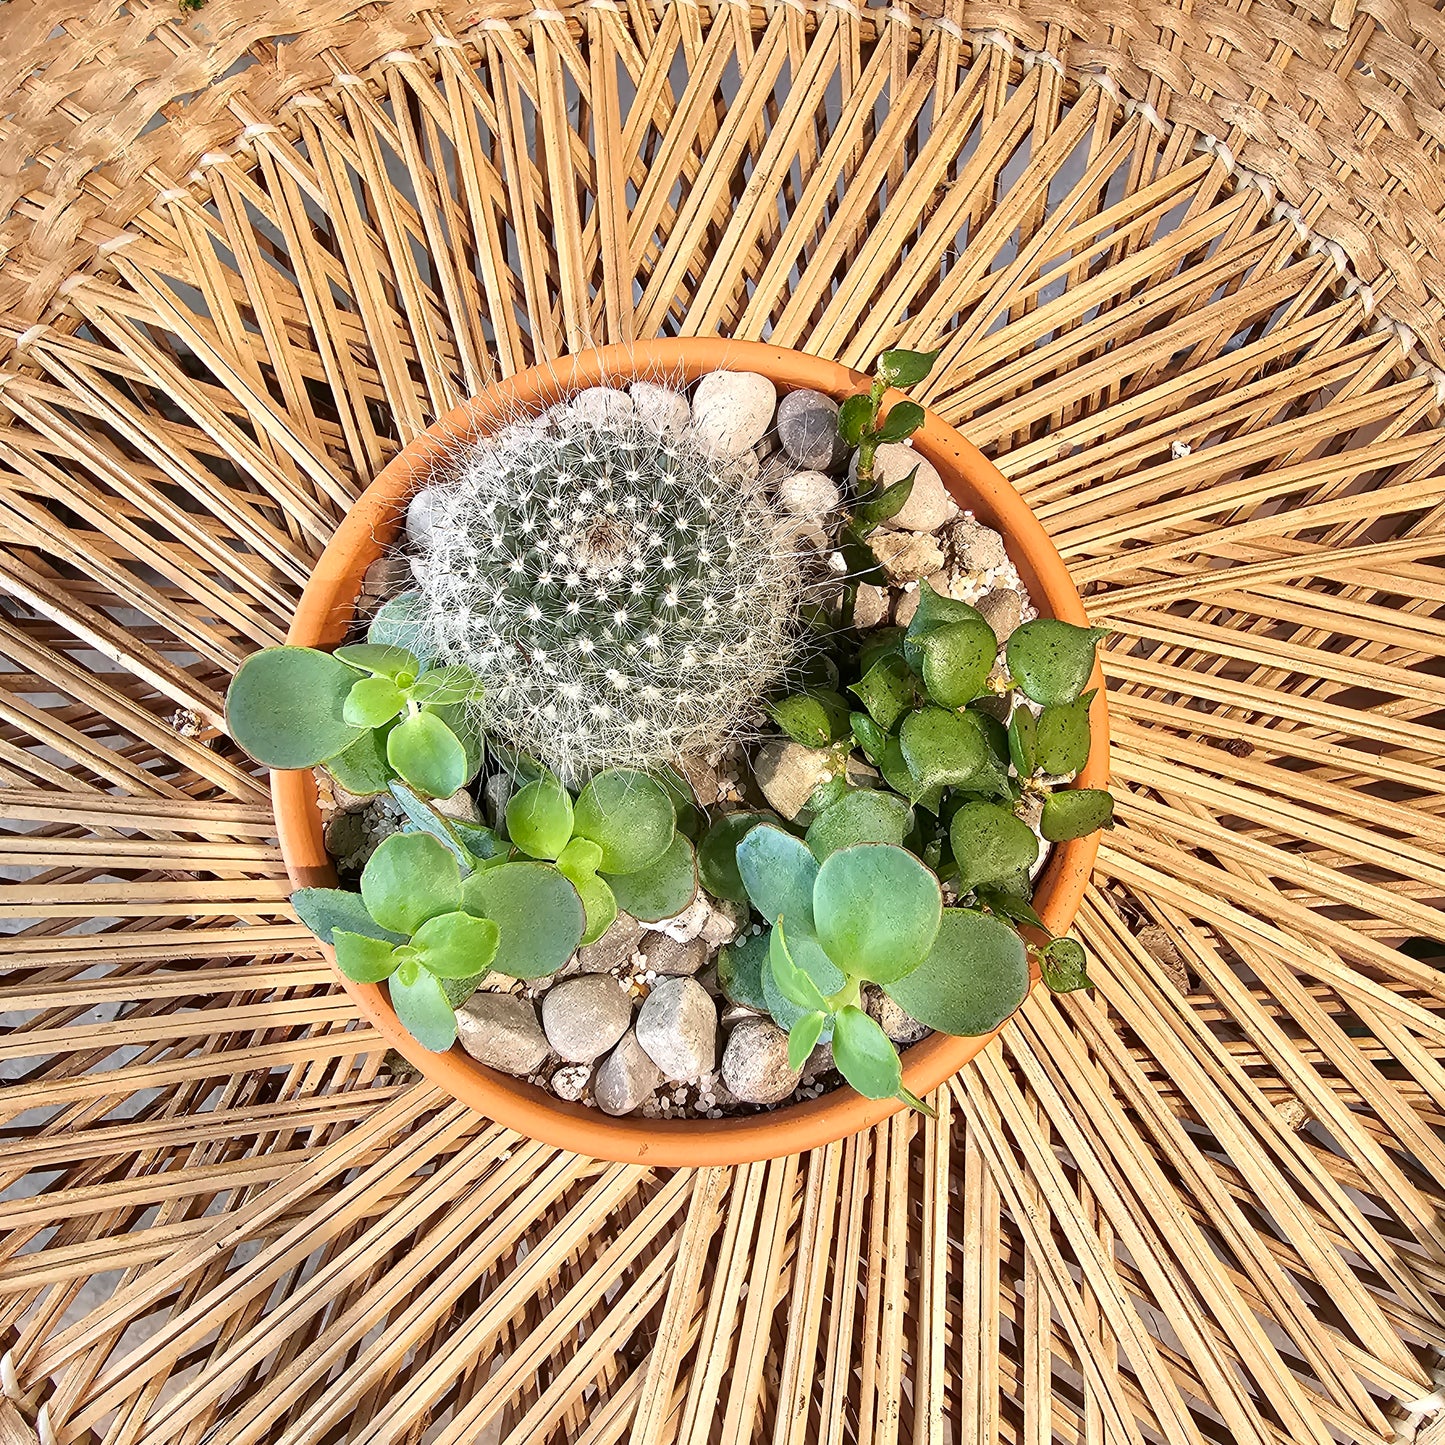 Succulent Garden: Assorted Succulents in a Terracotta Pot with Drainage - 5 inch